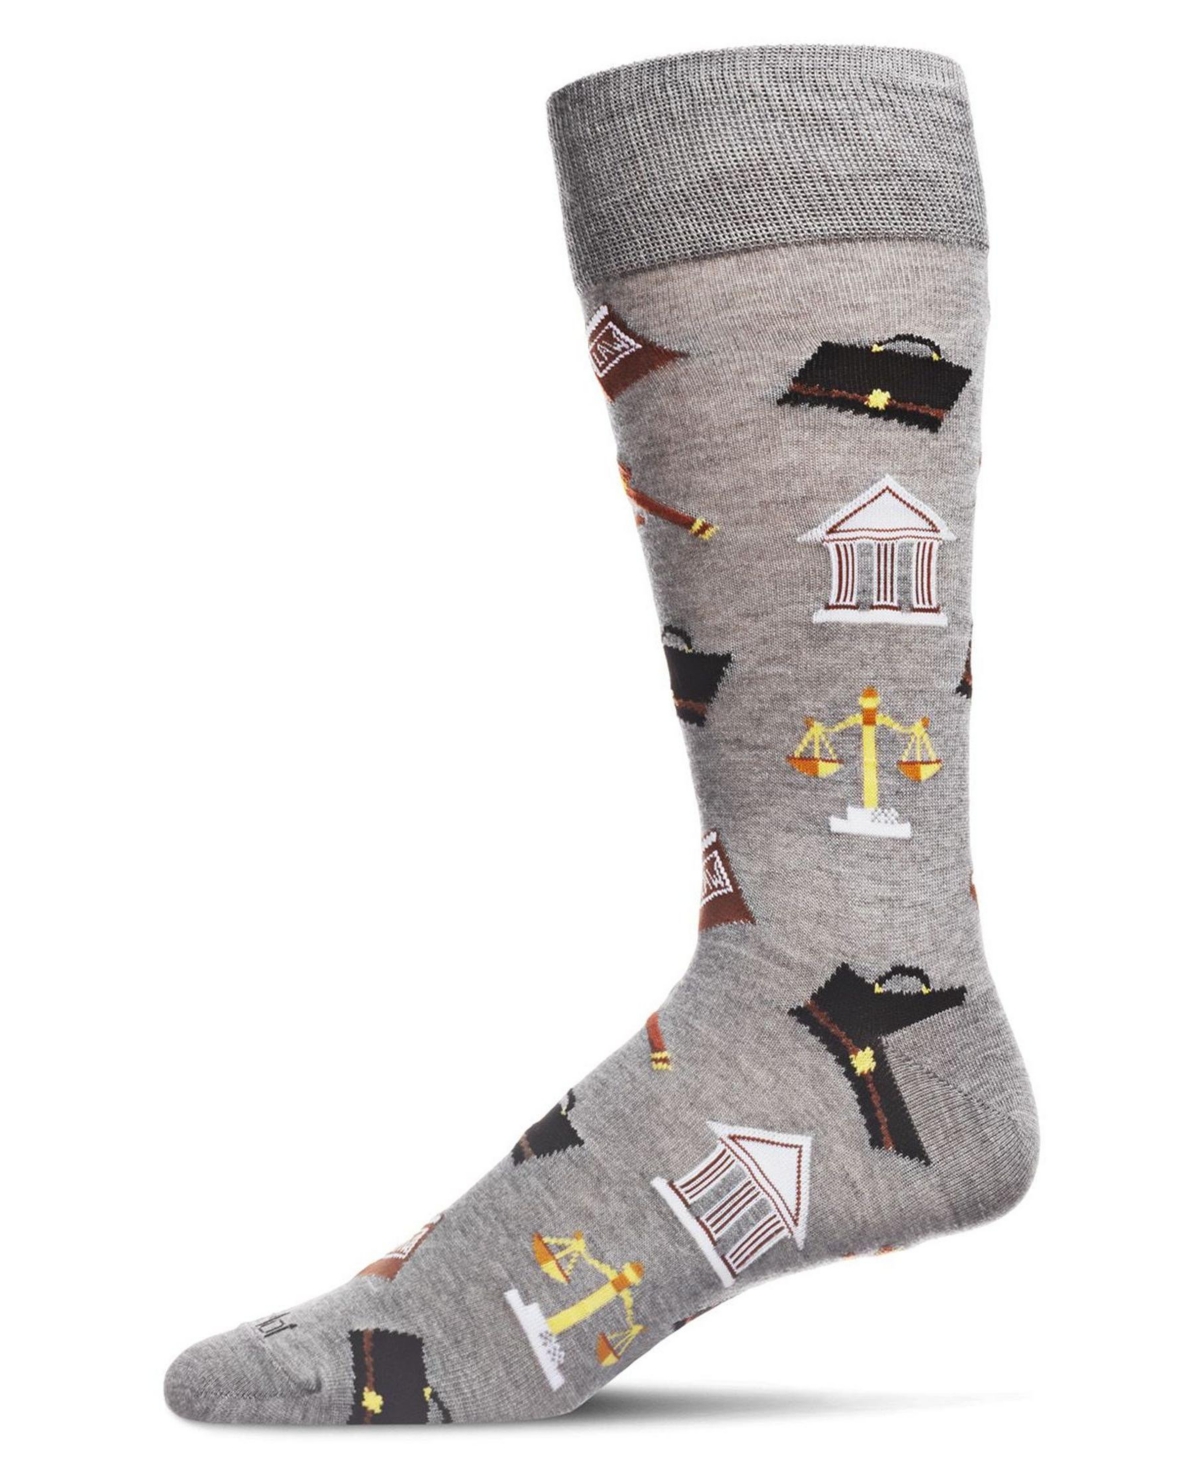 Memoi Men's Law And Order Heathered Rayon From Bamboo Novelty Crew Socks In Medium Gray Heather